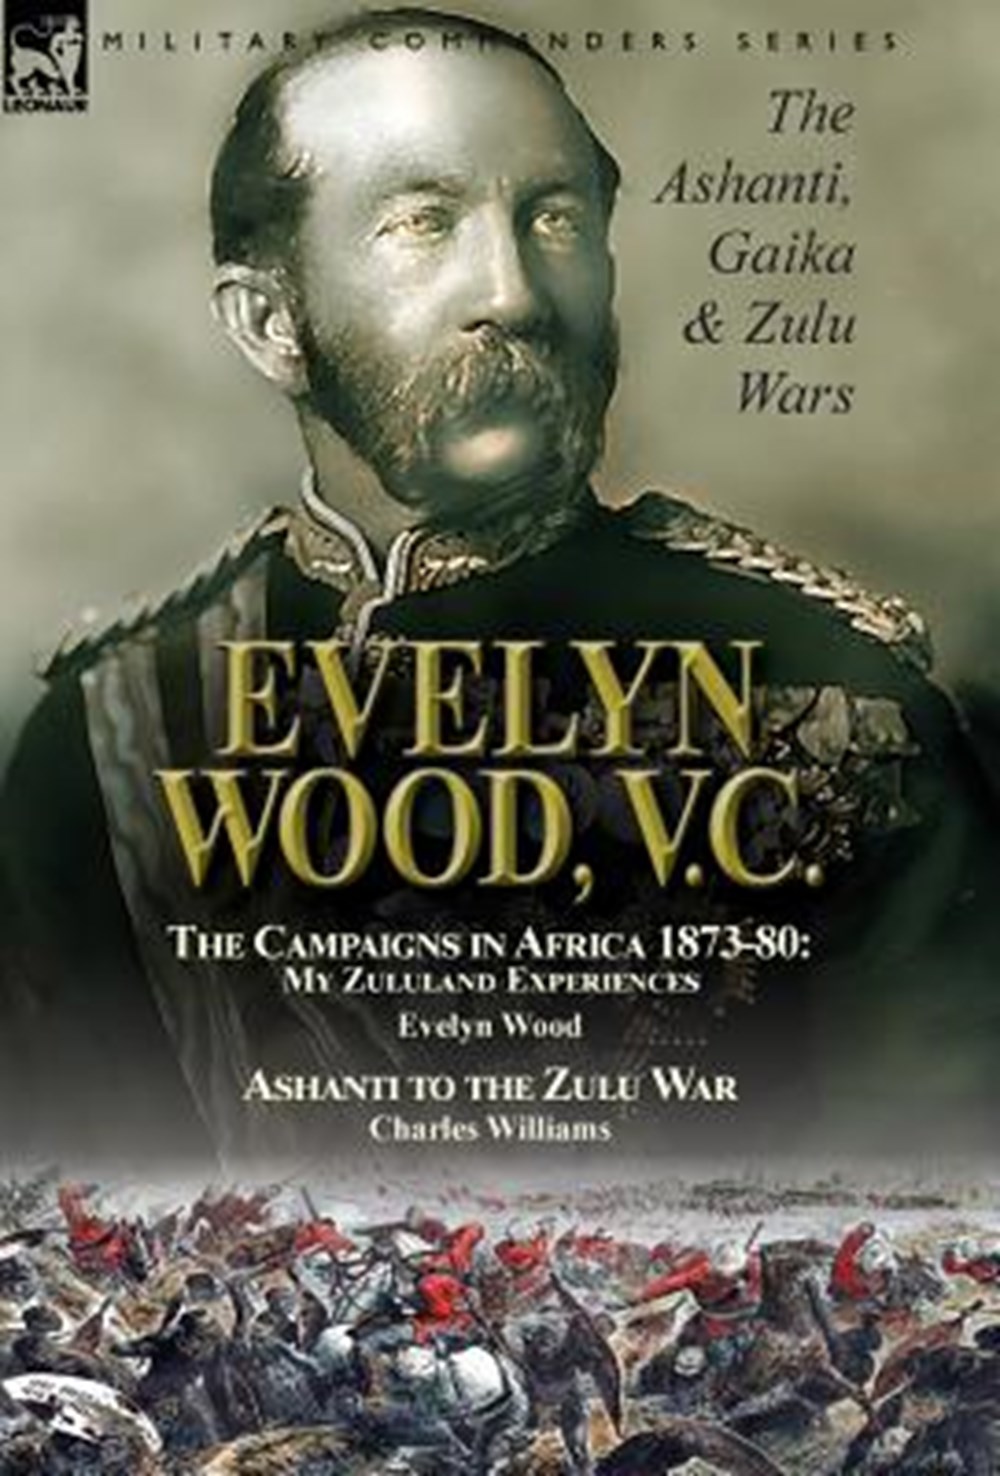 Evelyn Wood, V.C. the Ashanti, Gaika & Zulu Wars-The Campaigns in Africa 1873-1880: My Zululand Expe